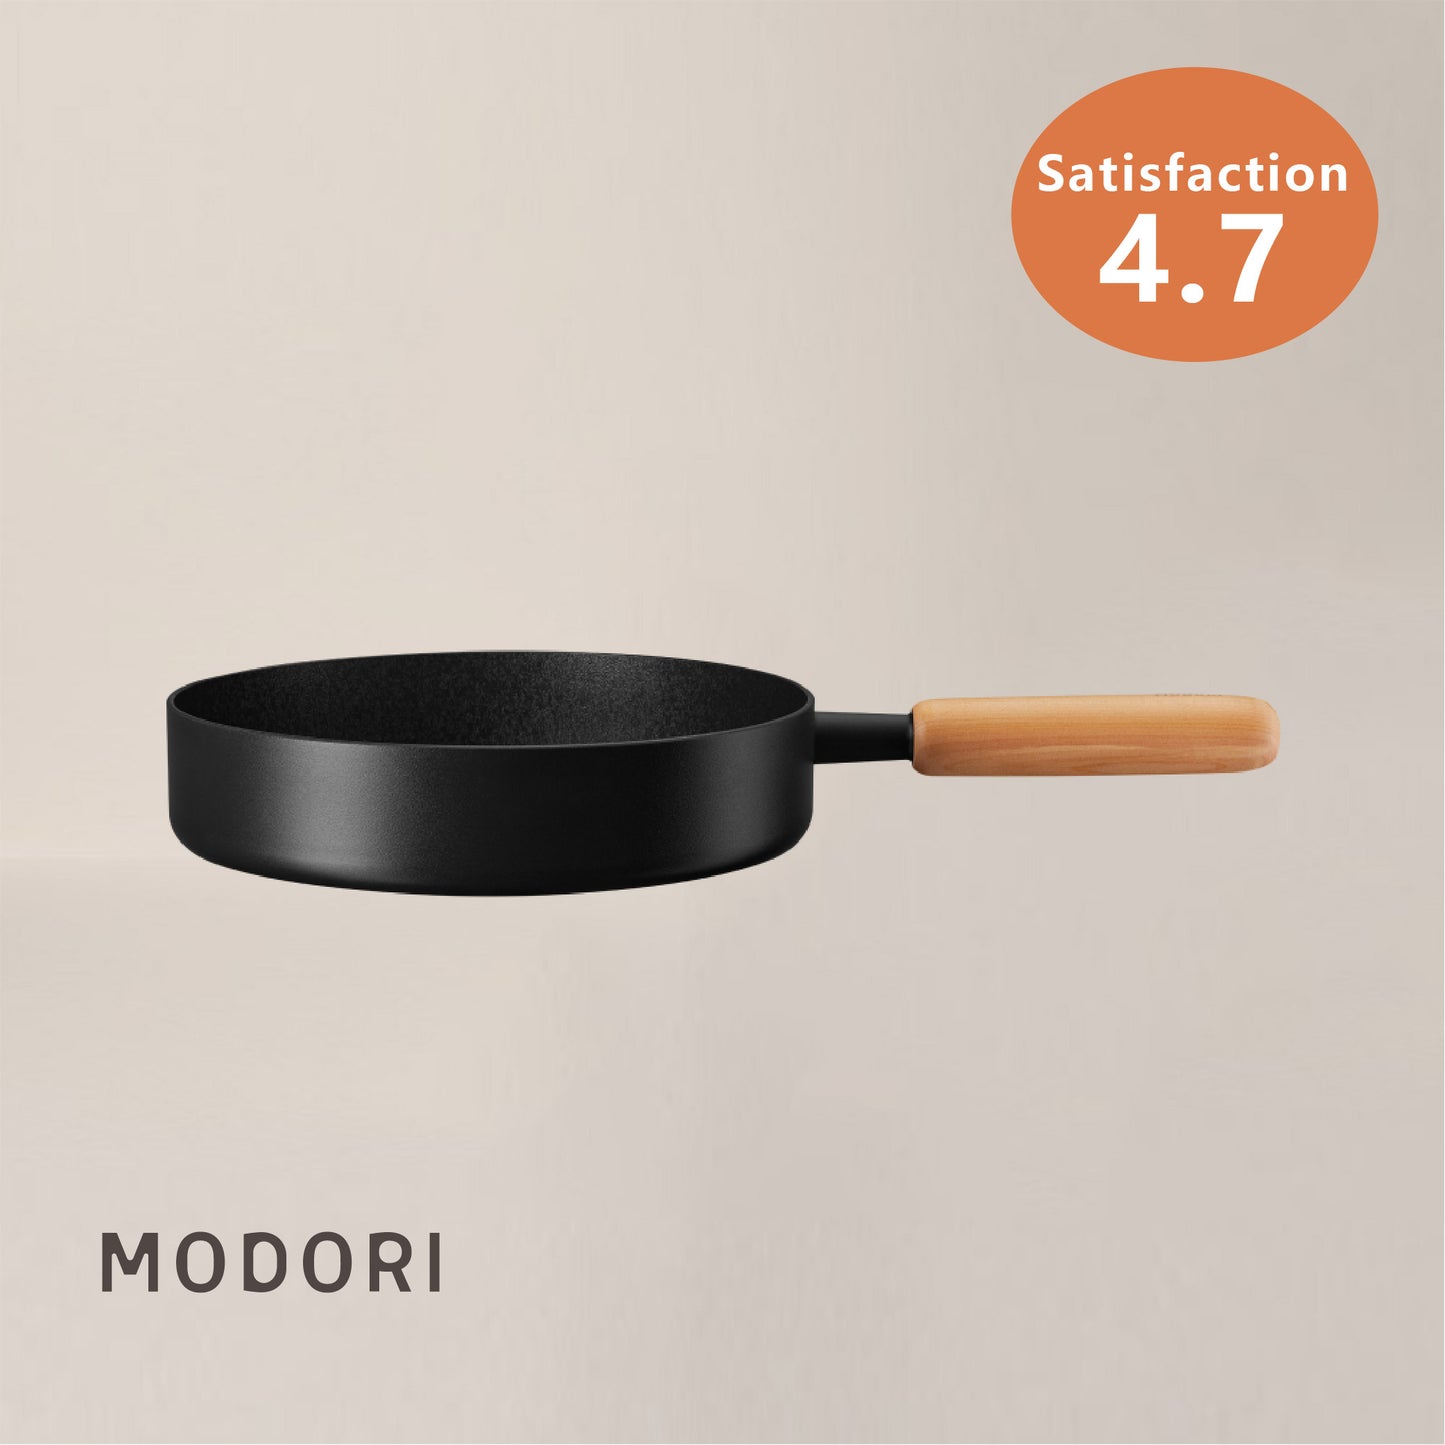 Modori Goodle Collection 24cm frying pan has wider surface is designed to cook just about anything without worrying about ingredients slipping out of the pan, from frying fish and pasta to cooking steak, it's just perfect for everyday use. Clean lining and neat design, a black body and a wooden handle for a warm and contemporary feel, ideal for long-term durability performance. Suitable for cooking with various stoves.